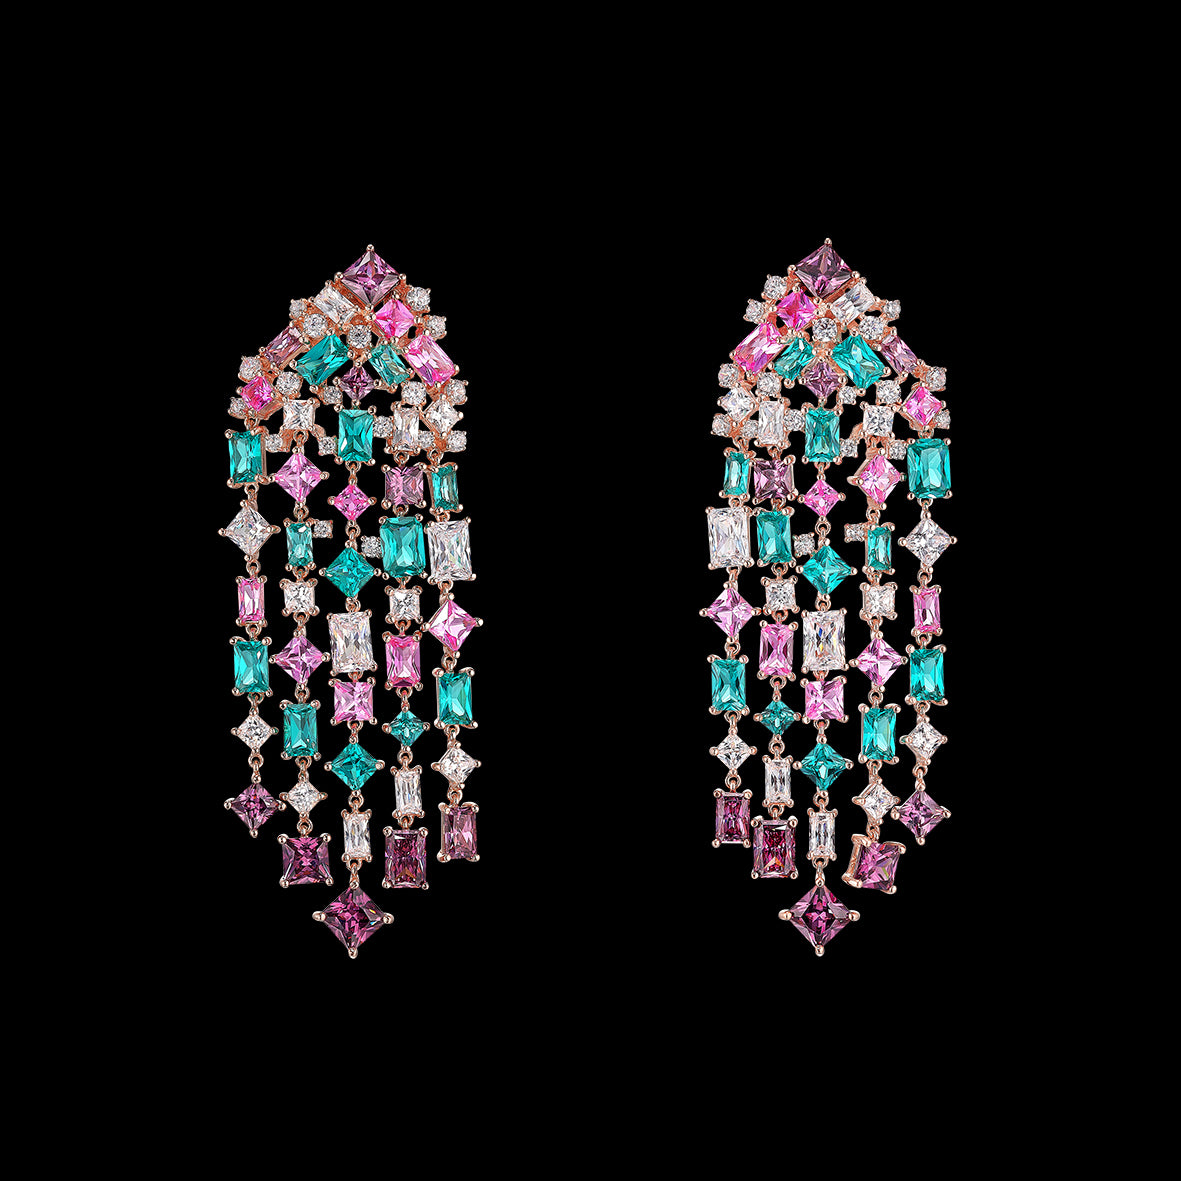 Paraiba Pink Cascade Earrings, Earrings, Anabela Chan Joaillerie - Fine jewelry with laboratory grown and created gemstones hand-crafted in the United Kingdom. Anabela Chan Joaillerie is the first fine jewellery brand in the world to champion laboratory-grown and created gemstones with high jewellery design, artisanal craftsmanship and a focus on ethical and sustainable innovations.